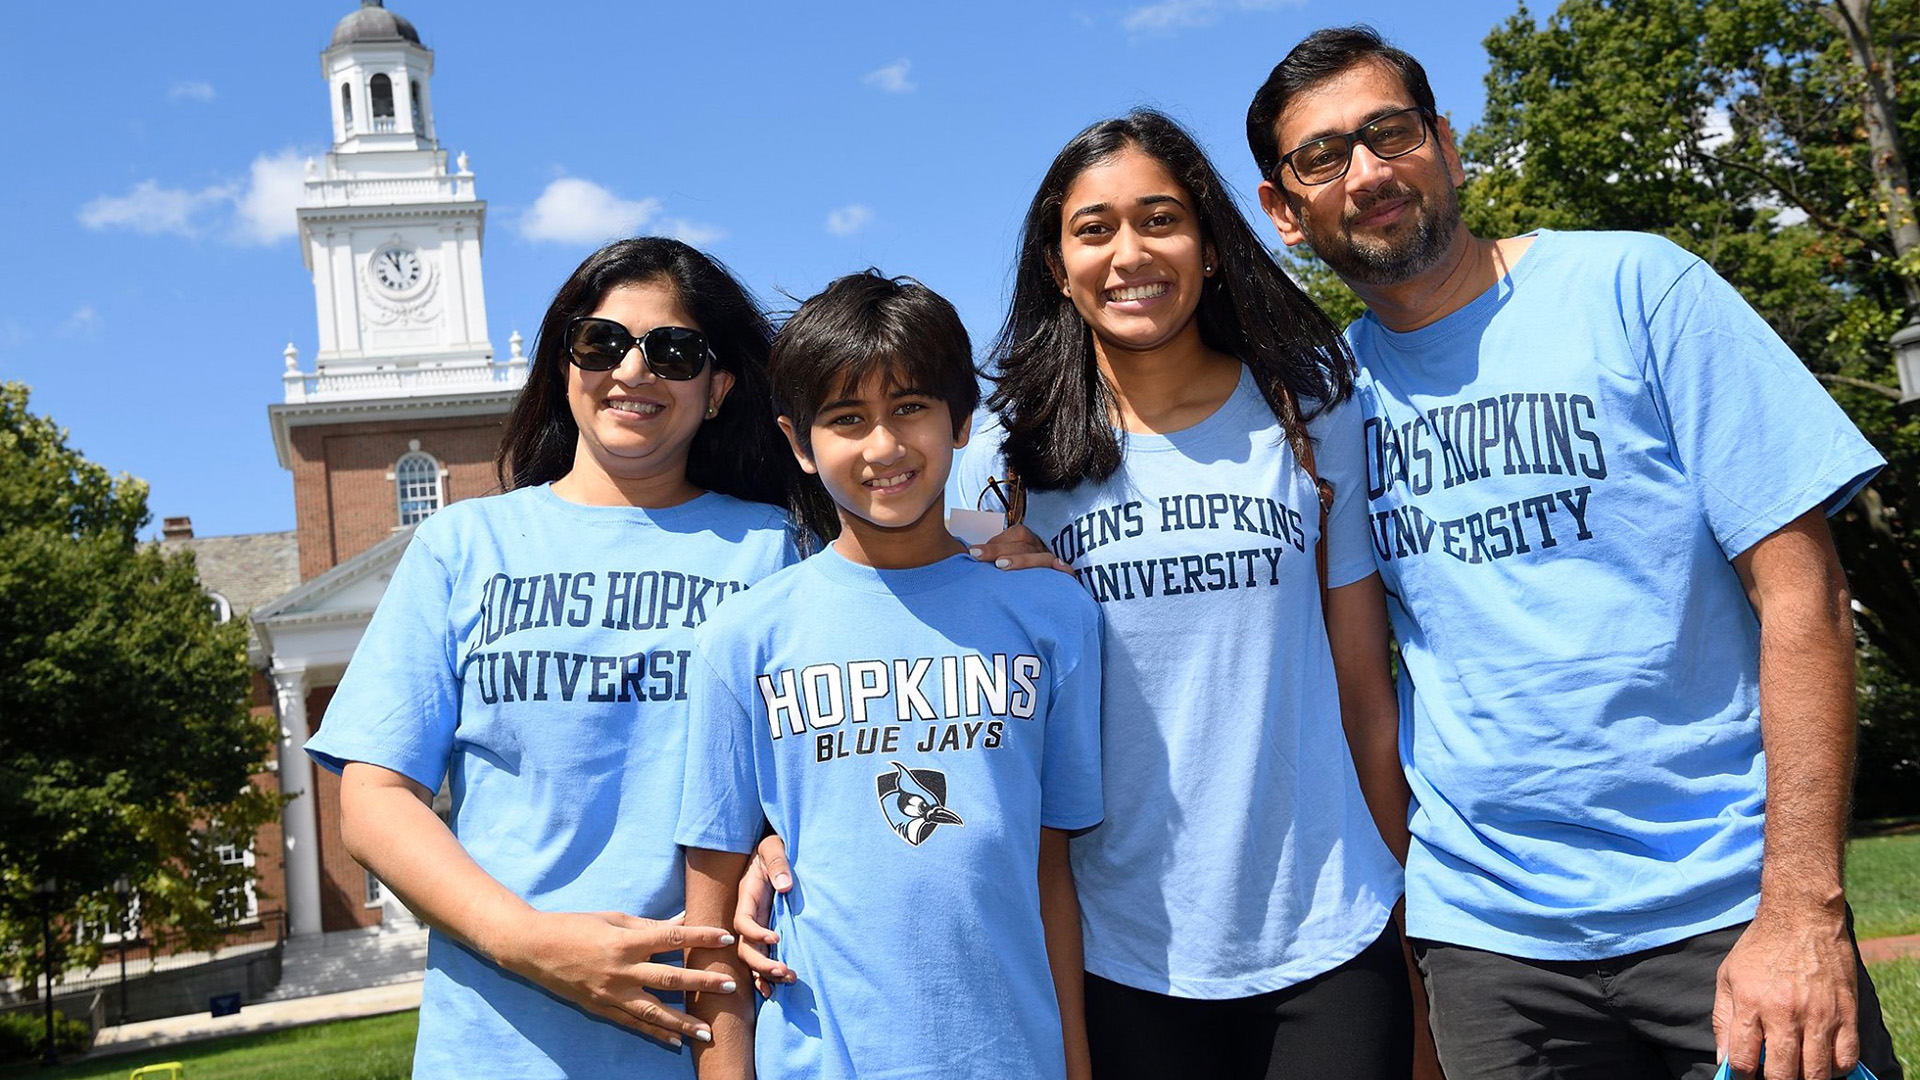 A family of four poses for a photo on Homewood campus while wearing Johns Hopkins t-shirts